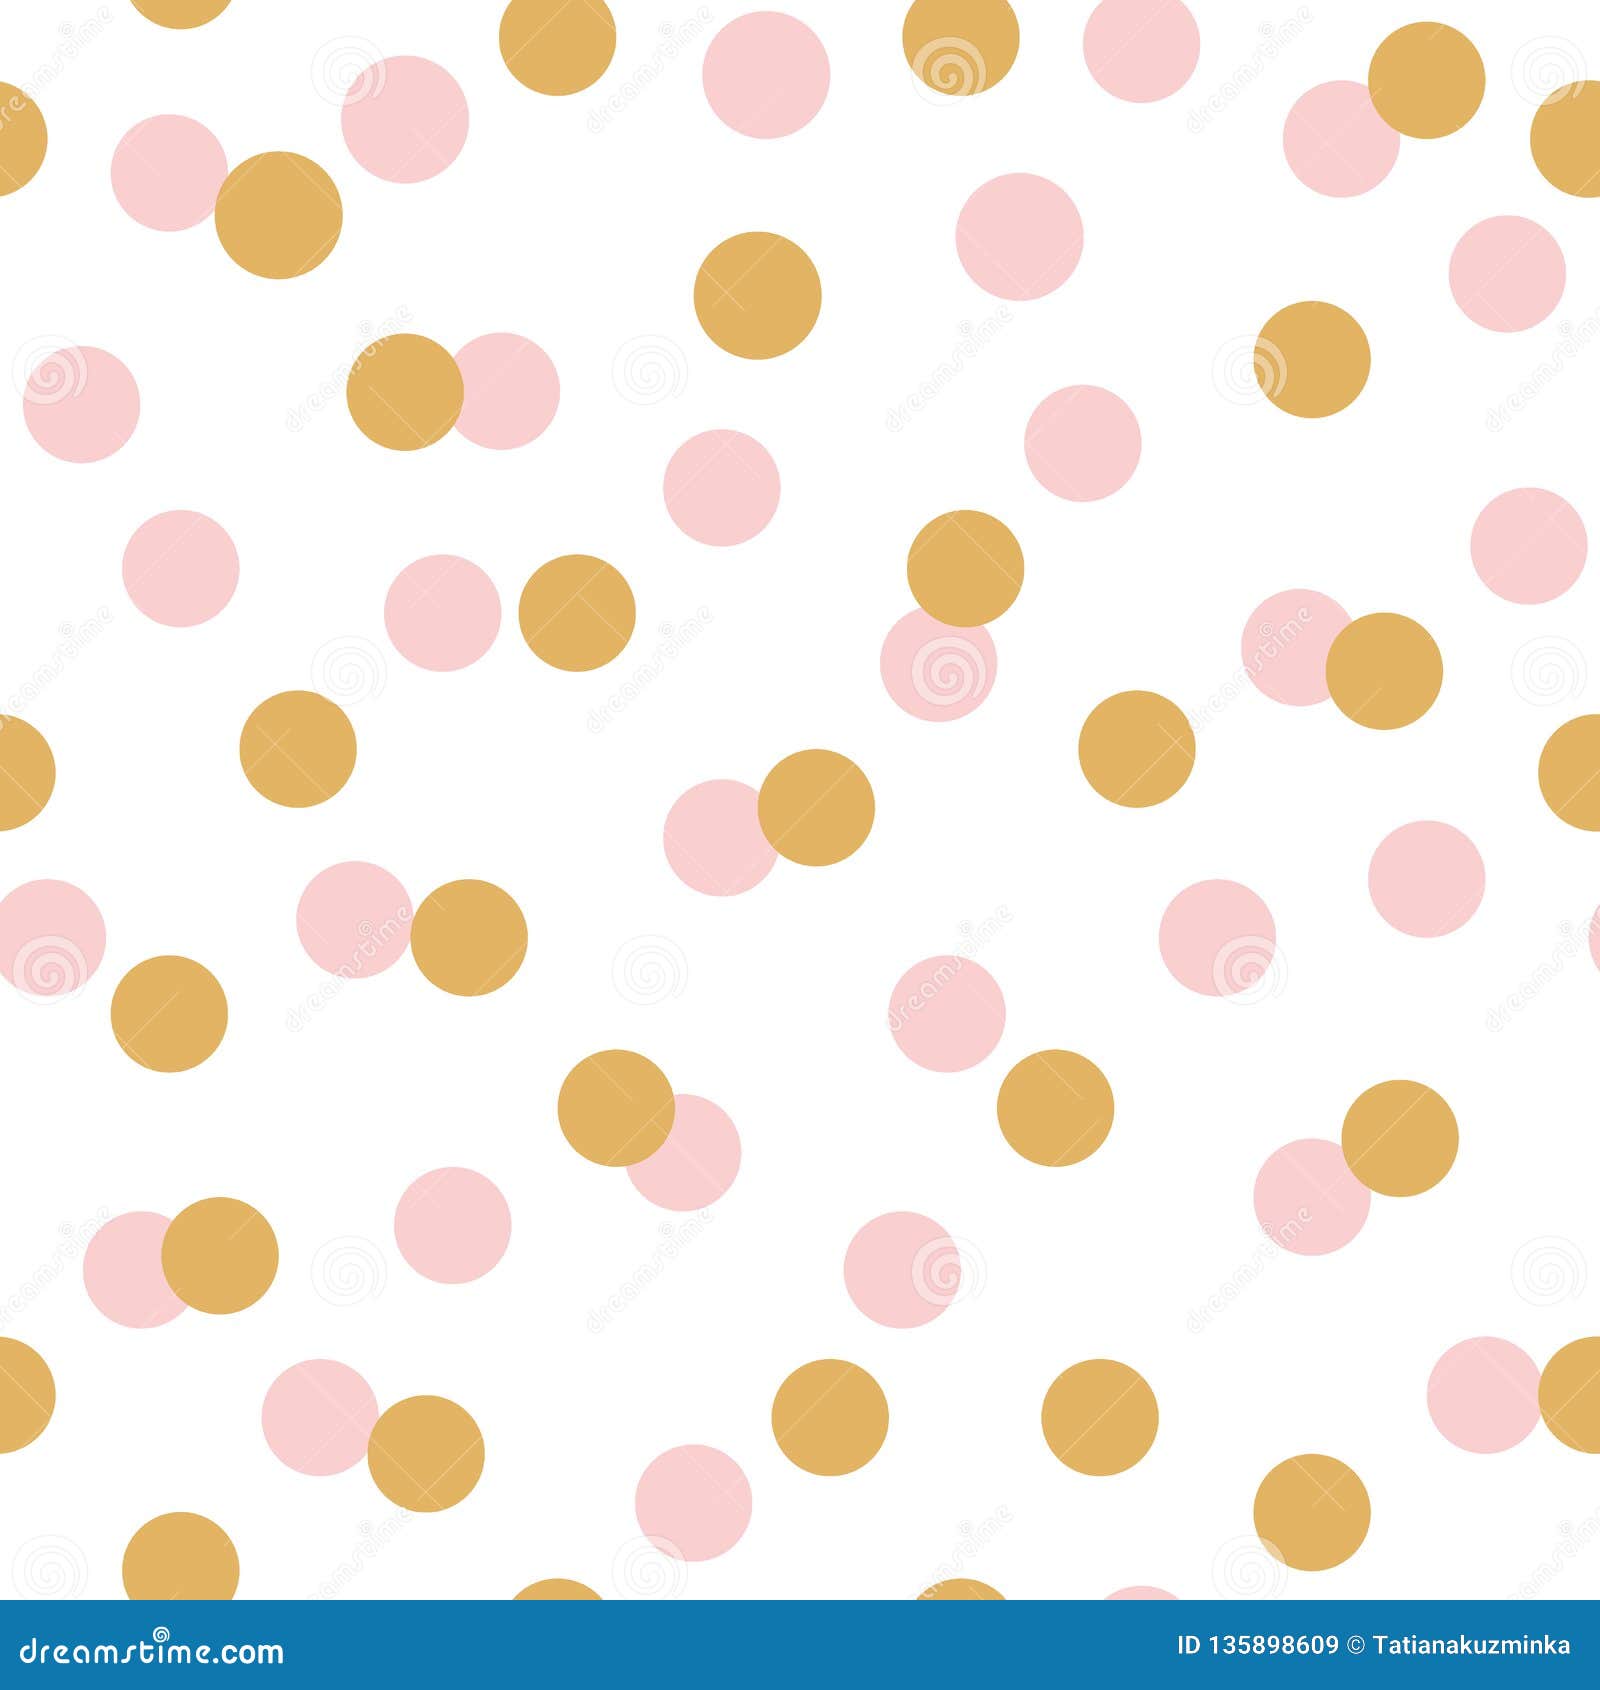 Polka Dots Seamless Pattern with Gold Pink Circles on White Background Pink  Seamless Pattern Stock Illustration - Illustration of holiday, design:  135898609